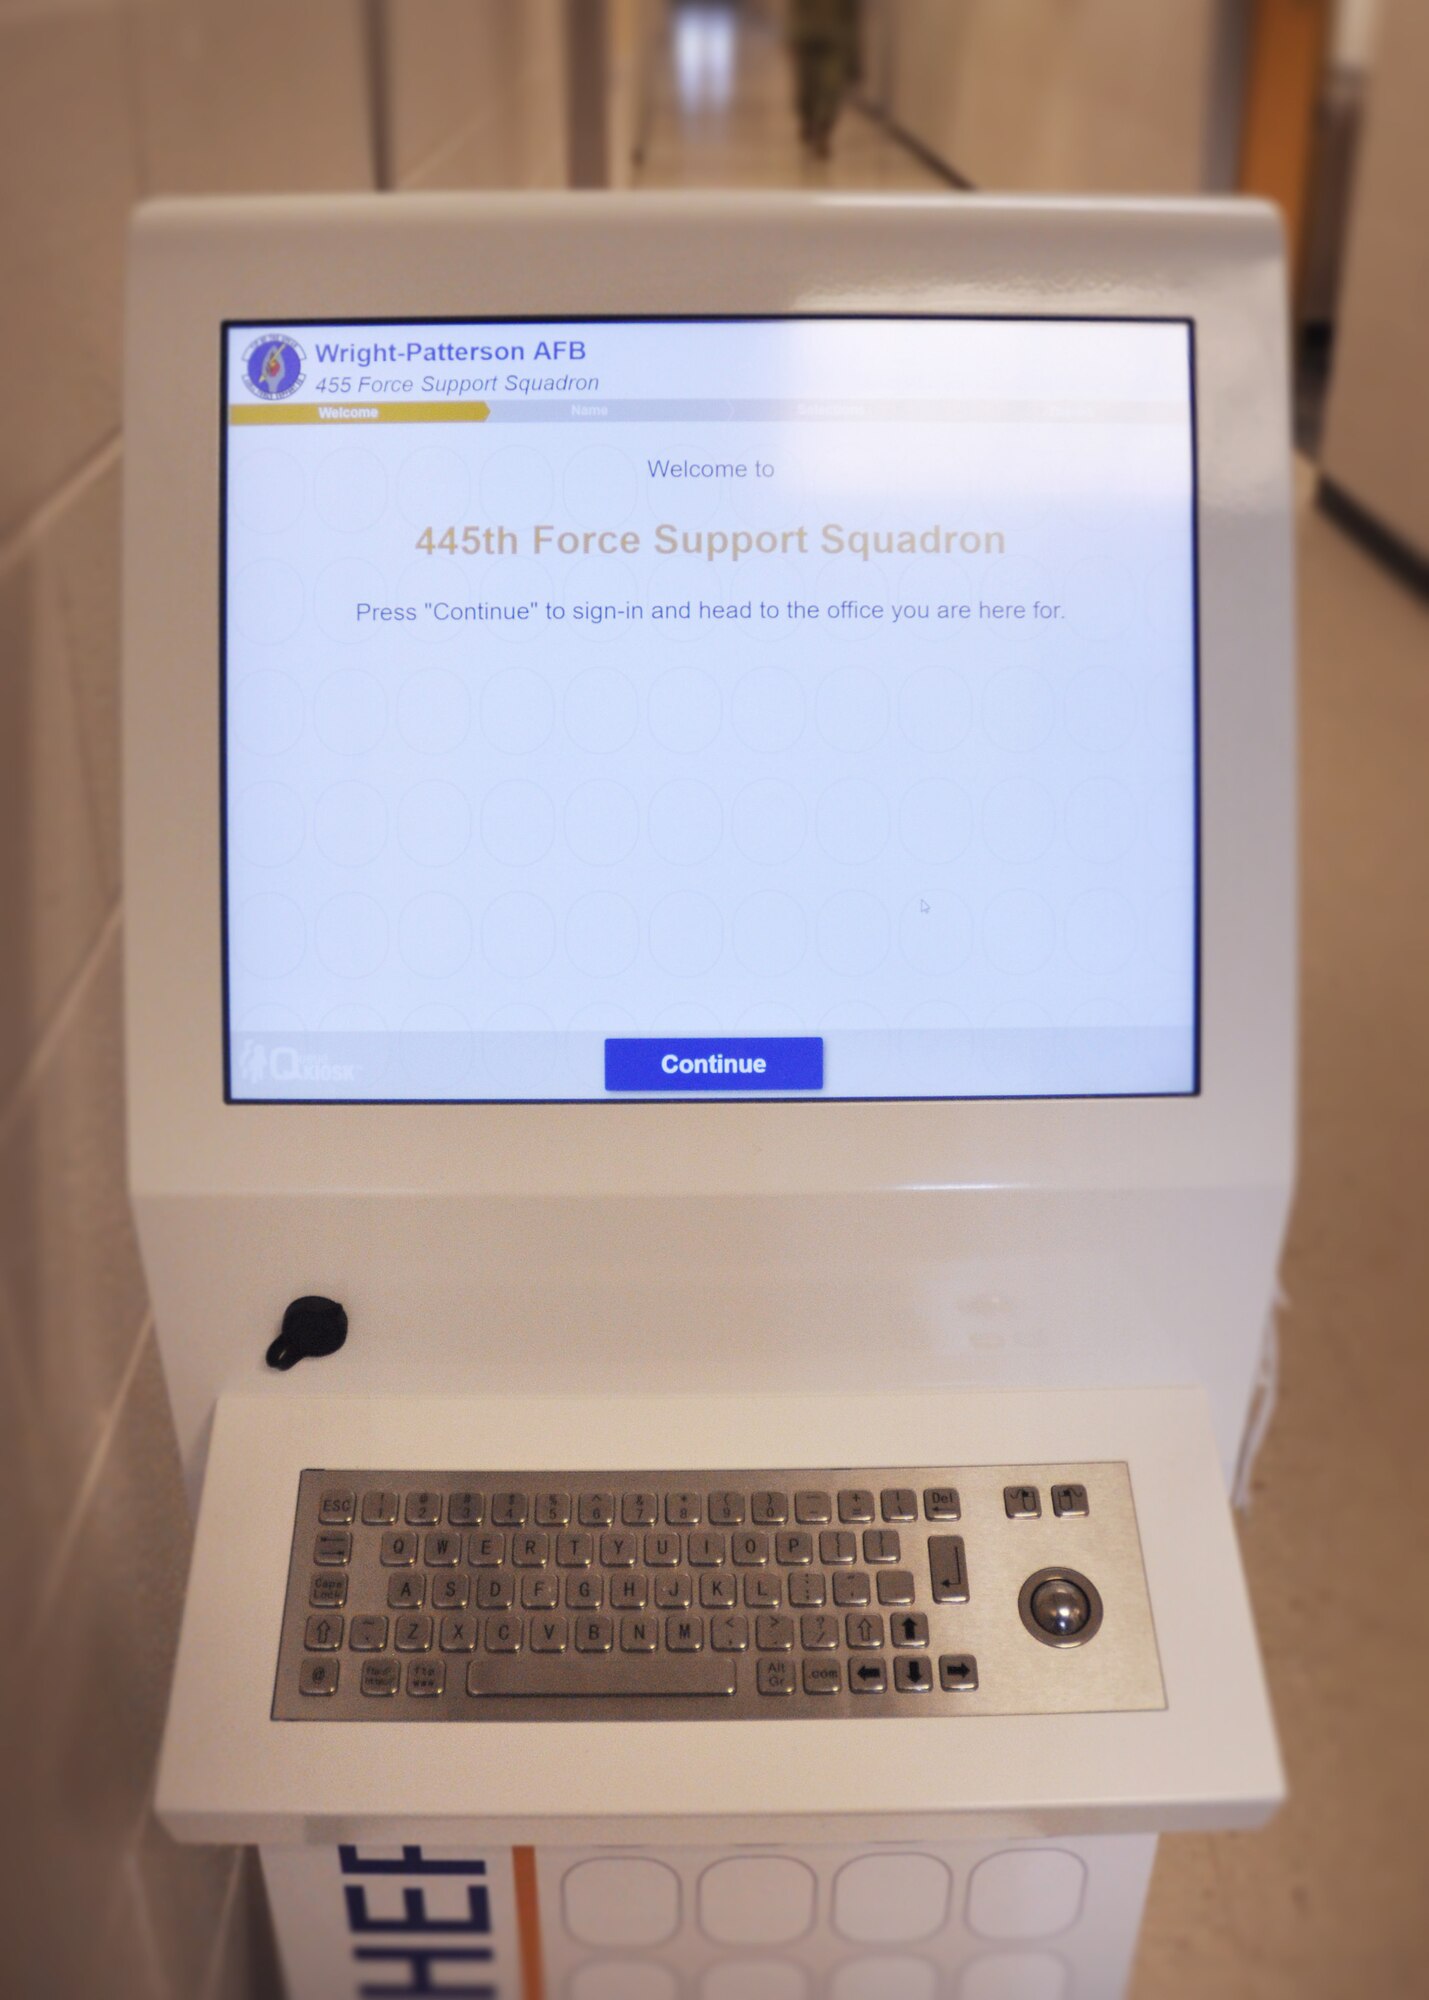 Customers seeking services from the 445th Force Support Squadron are greeted by a new, digital sign in system. Featuring a user-friendly interface, the kiosk adds customers to the queue for each office located within FSS.